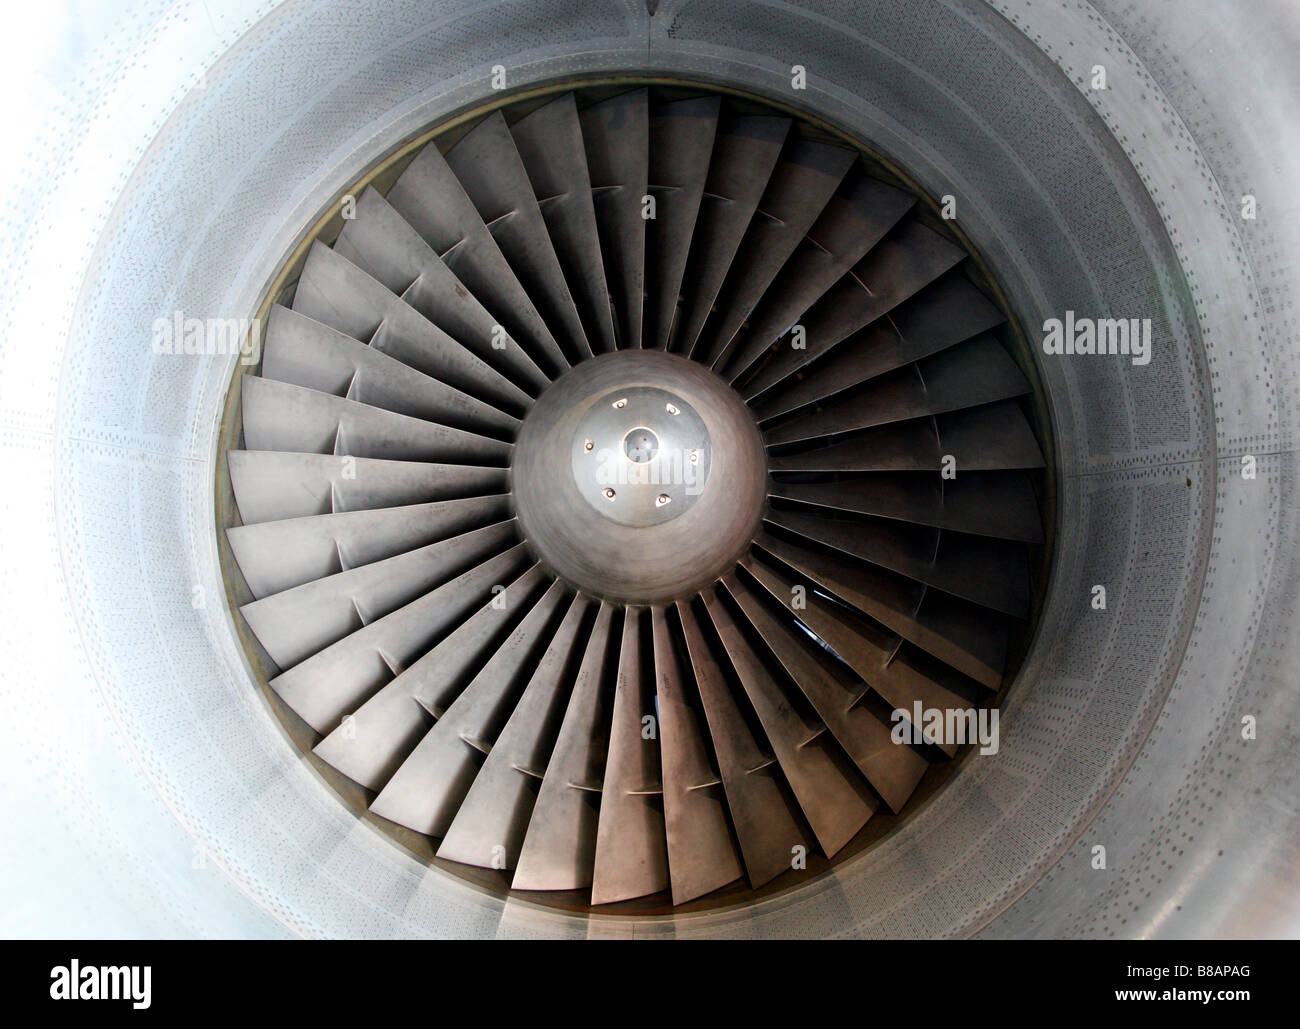 Intake of Rolls Royce jet aircraft engine in Science Museum, London Stock Photo